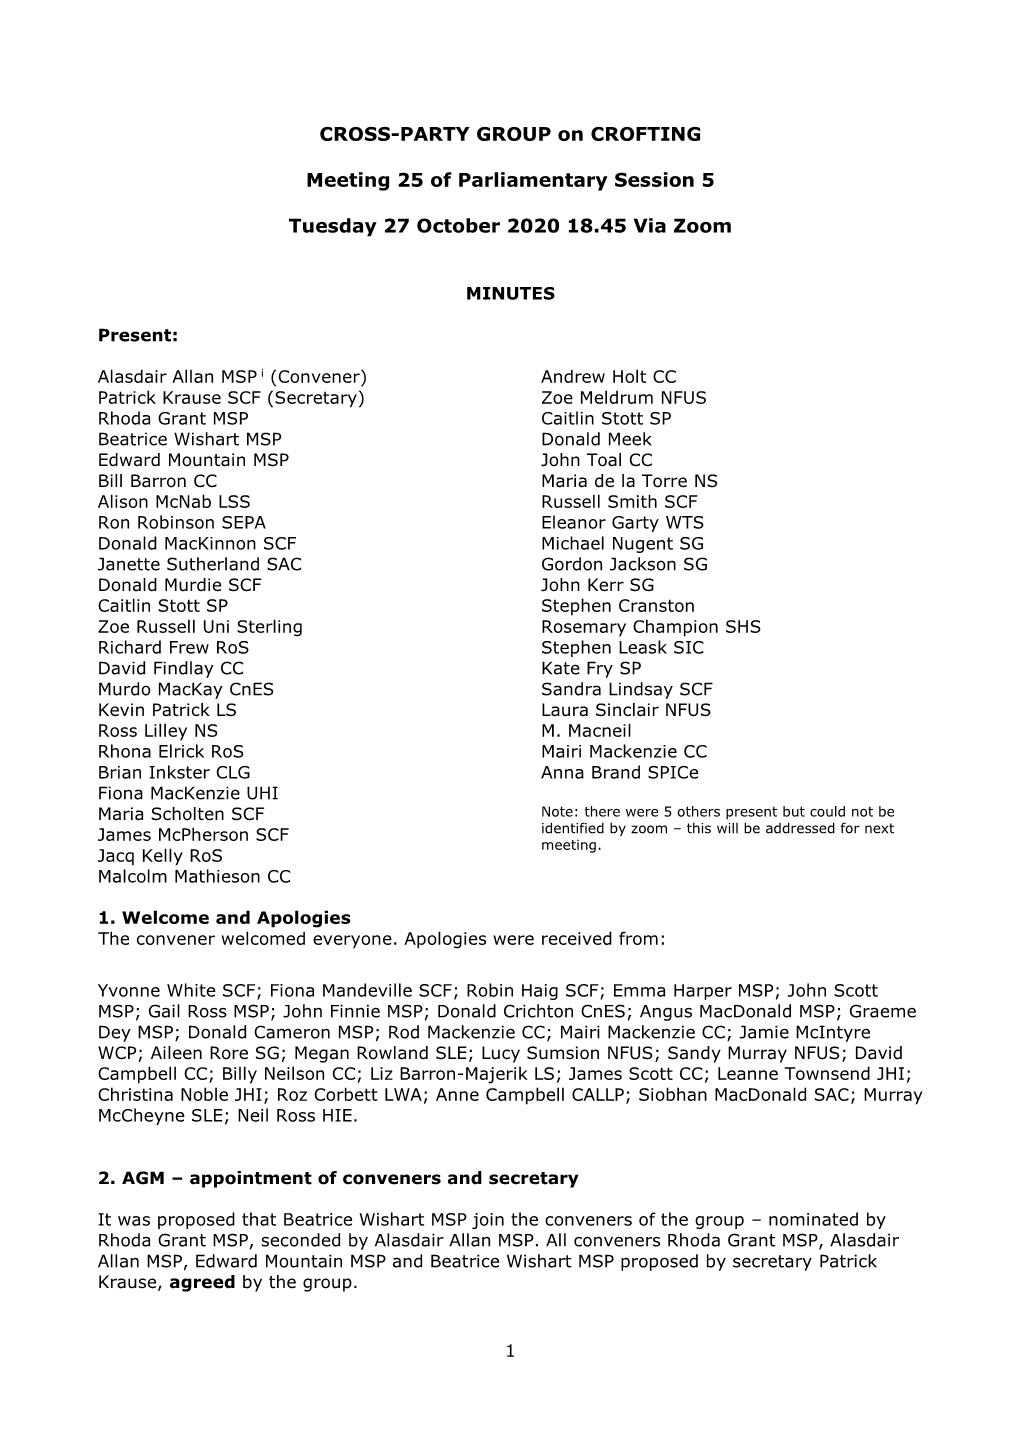 CROSS-PARTY GROUP on CROFTING Meeting 25 Of